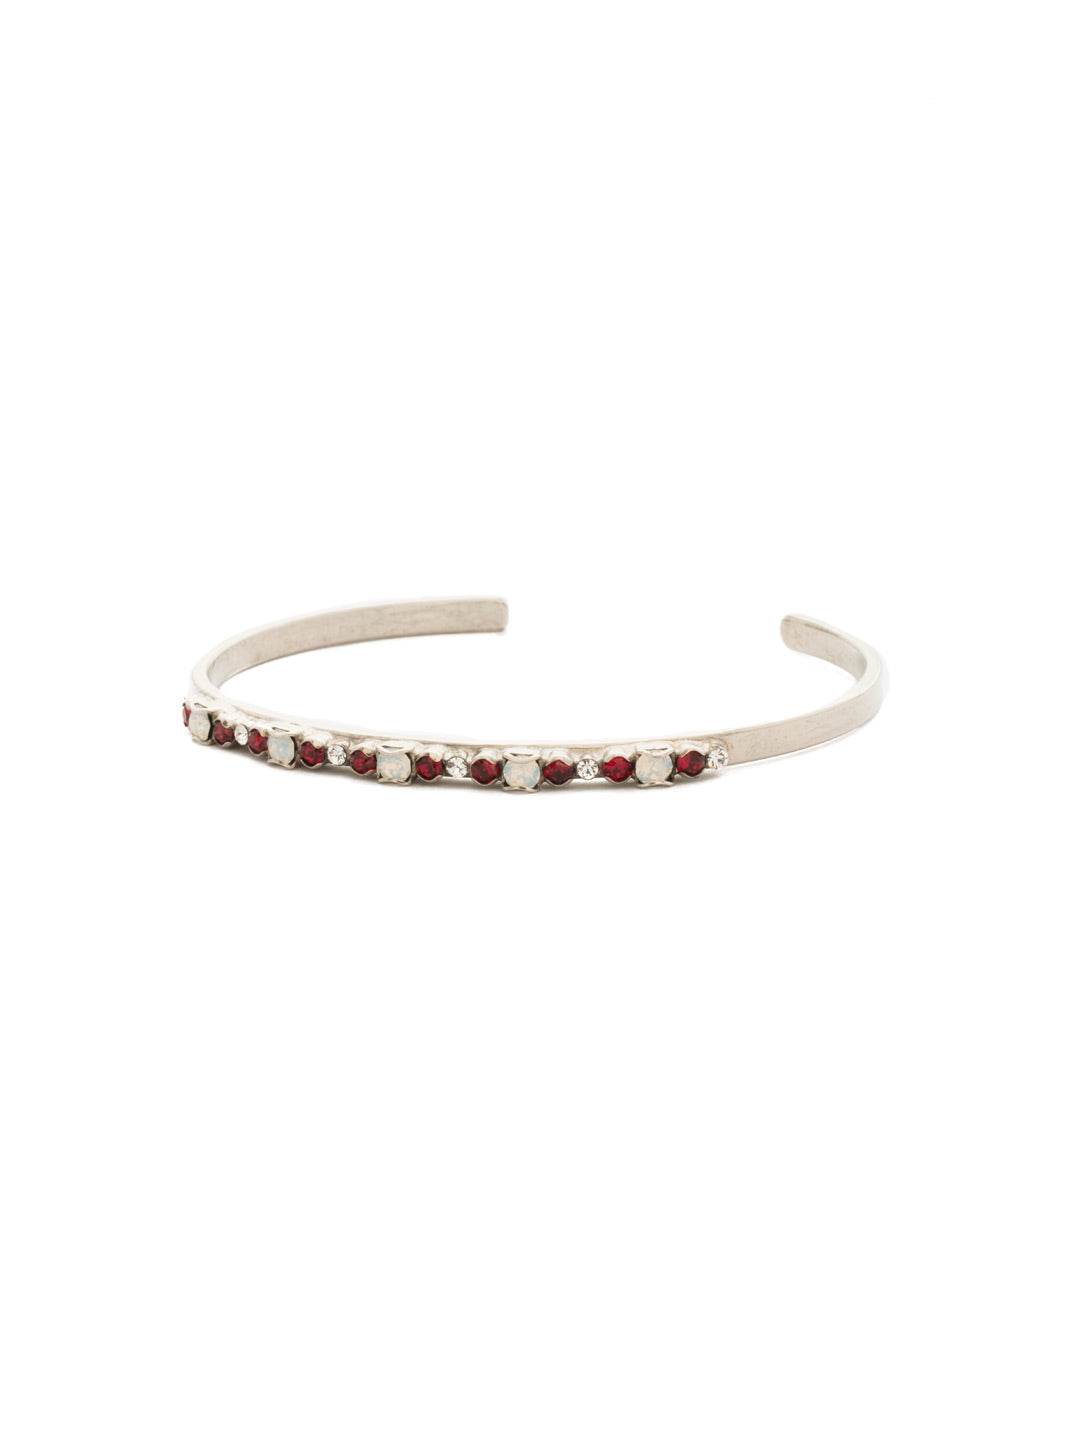 Product Image: The Skinny Cuff Bracelet